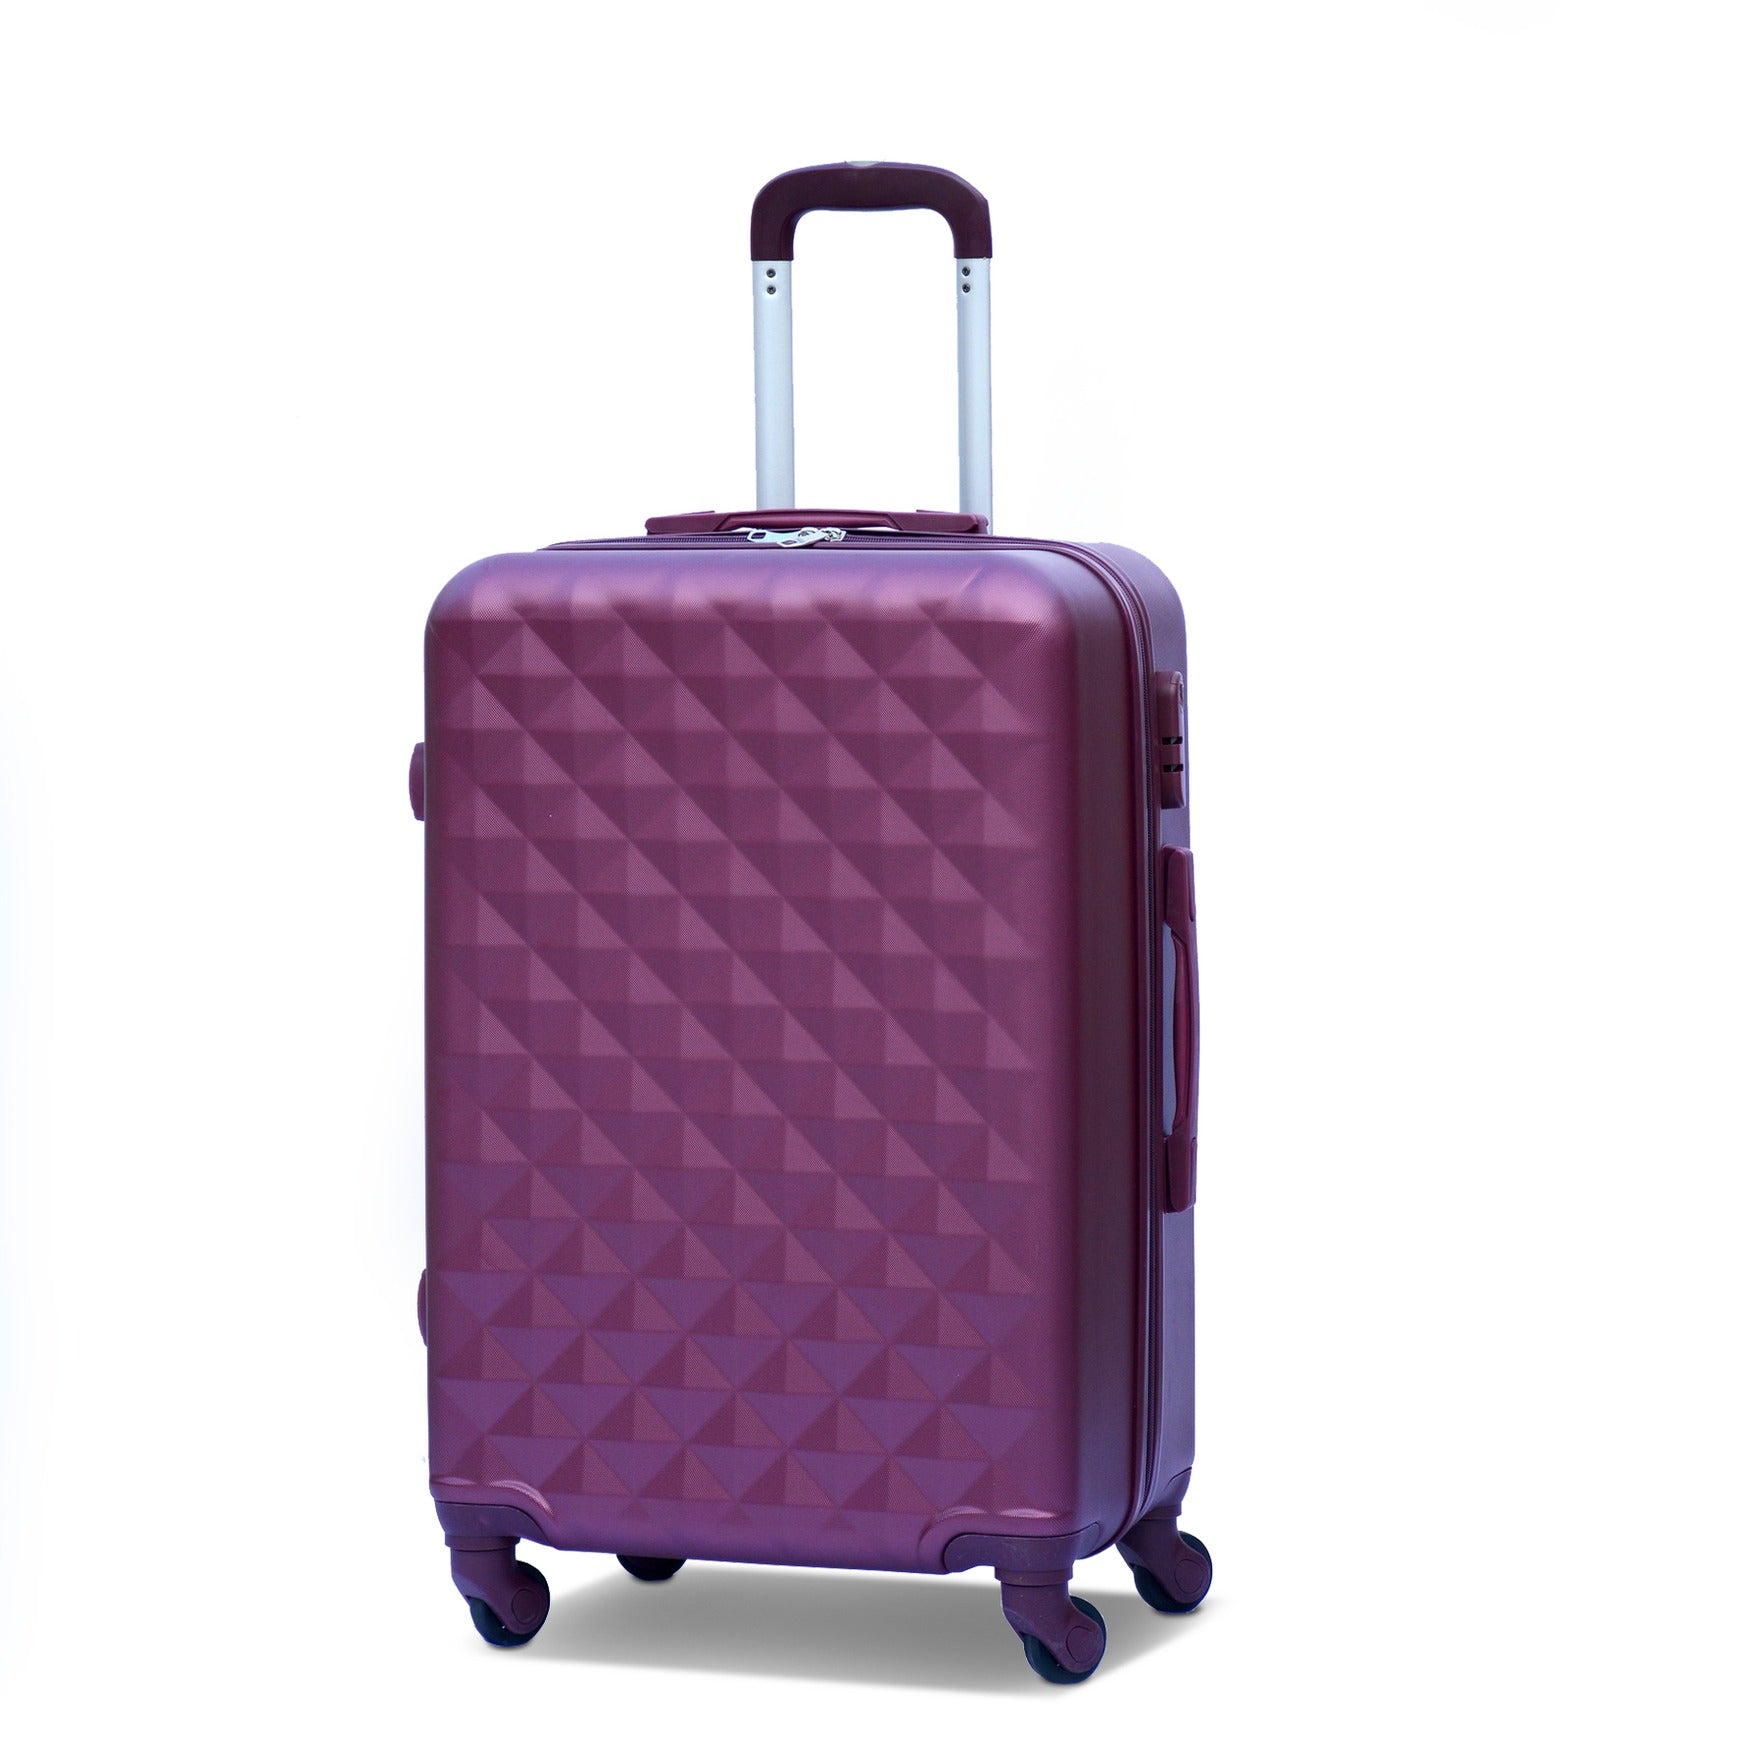 20" Diamond Cut ABS Lightweight Carry On Luggage Bag With Spinner Wheel Zaappy